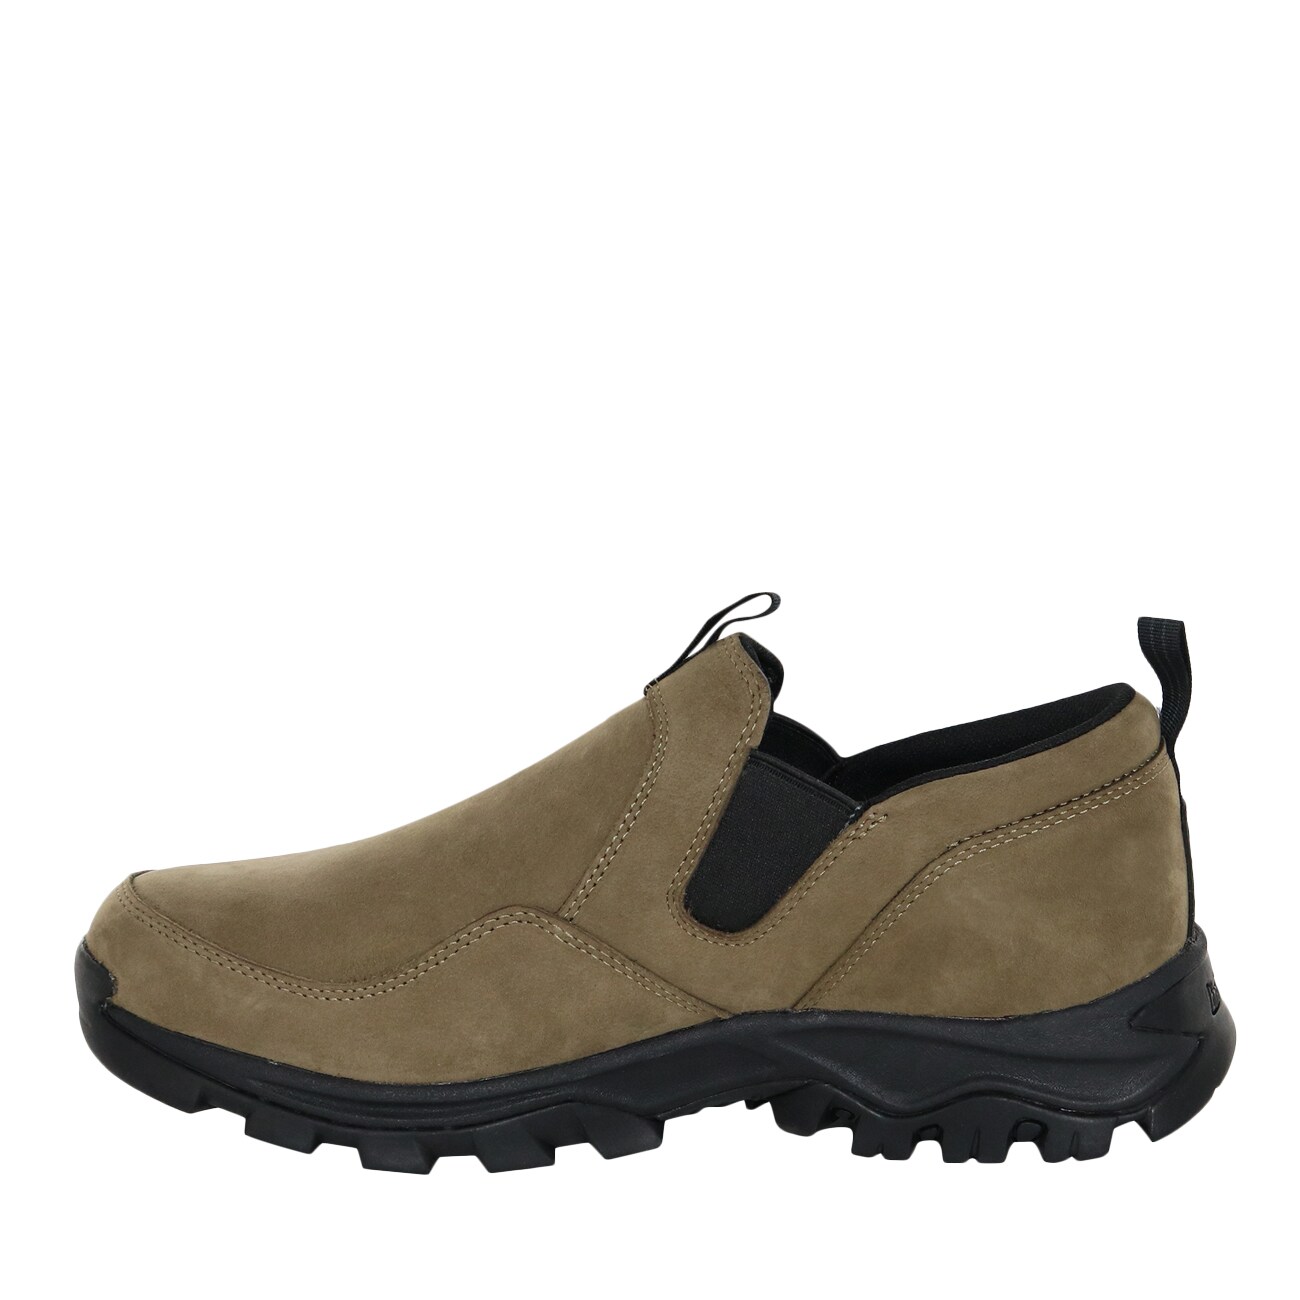 Timberland Mt. Maddsen Slip-On | The Shoe Company